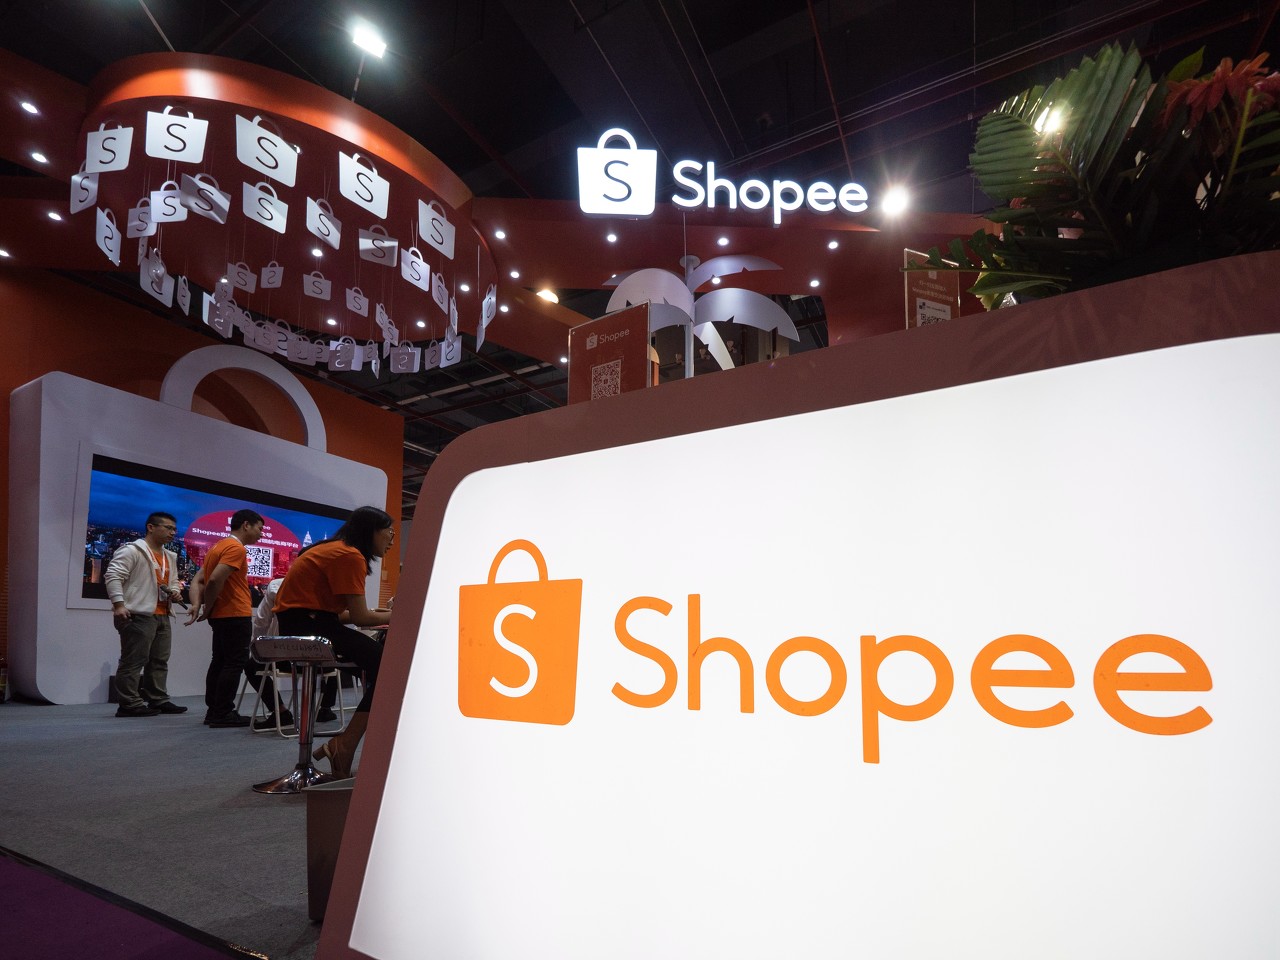 Shopee under investigation after K-pop promotion campaign goes wrong in the Philippines | KrASIA